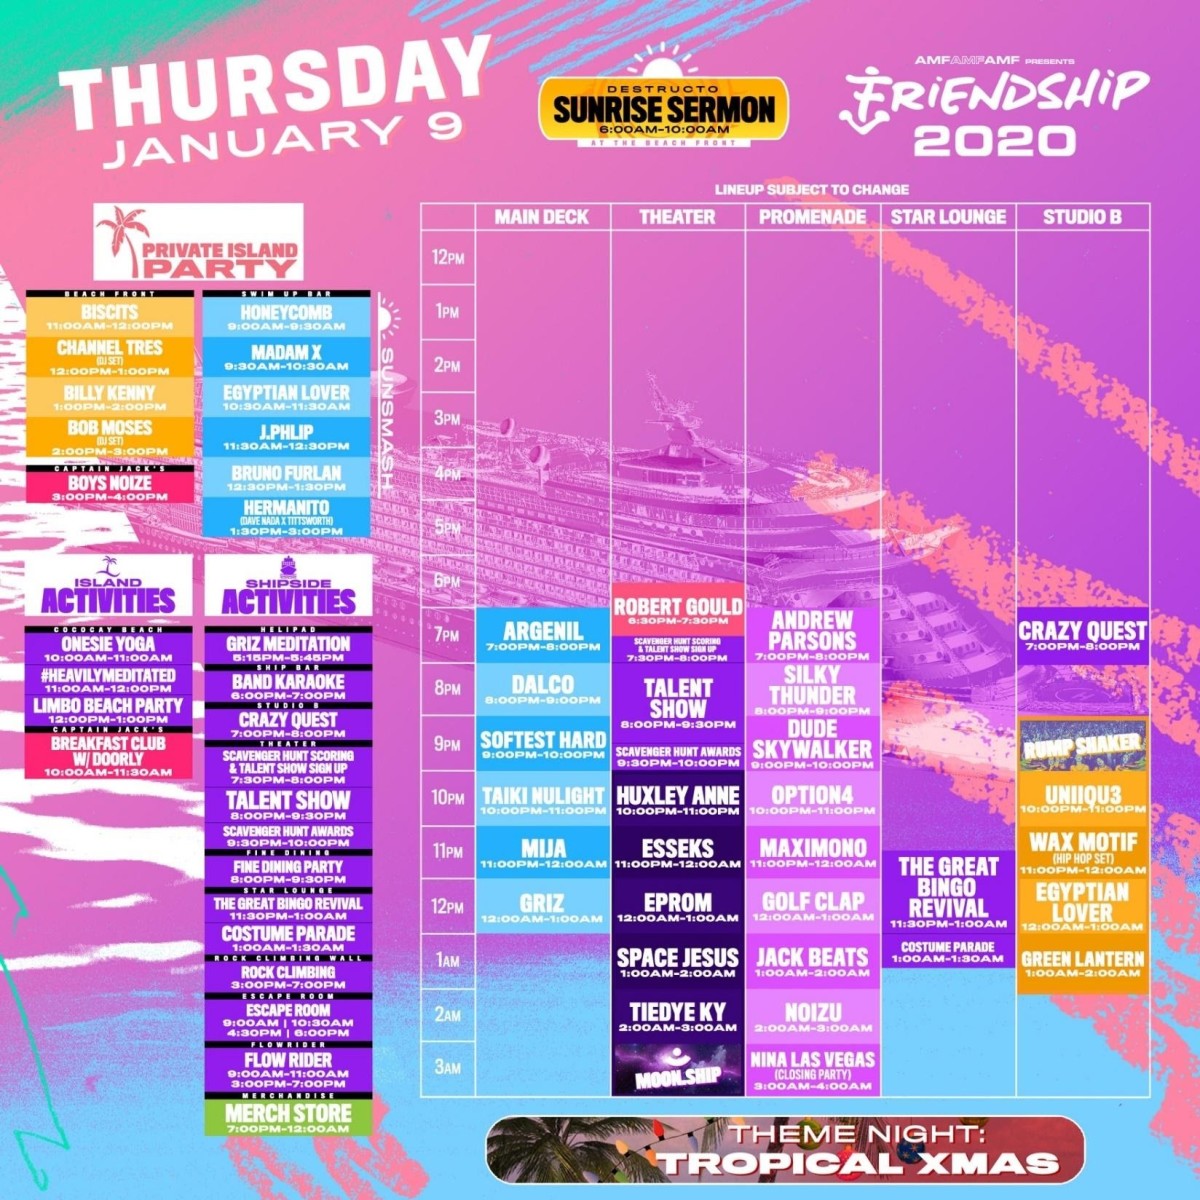 FriendShip 2020 Lineup by Day Thursday